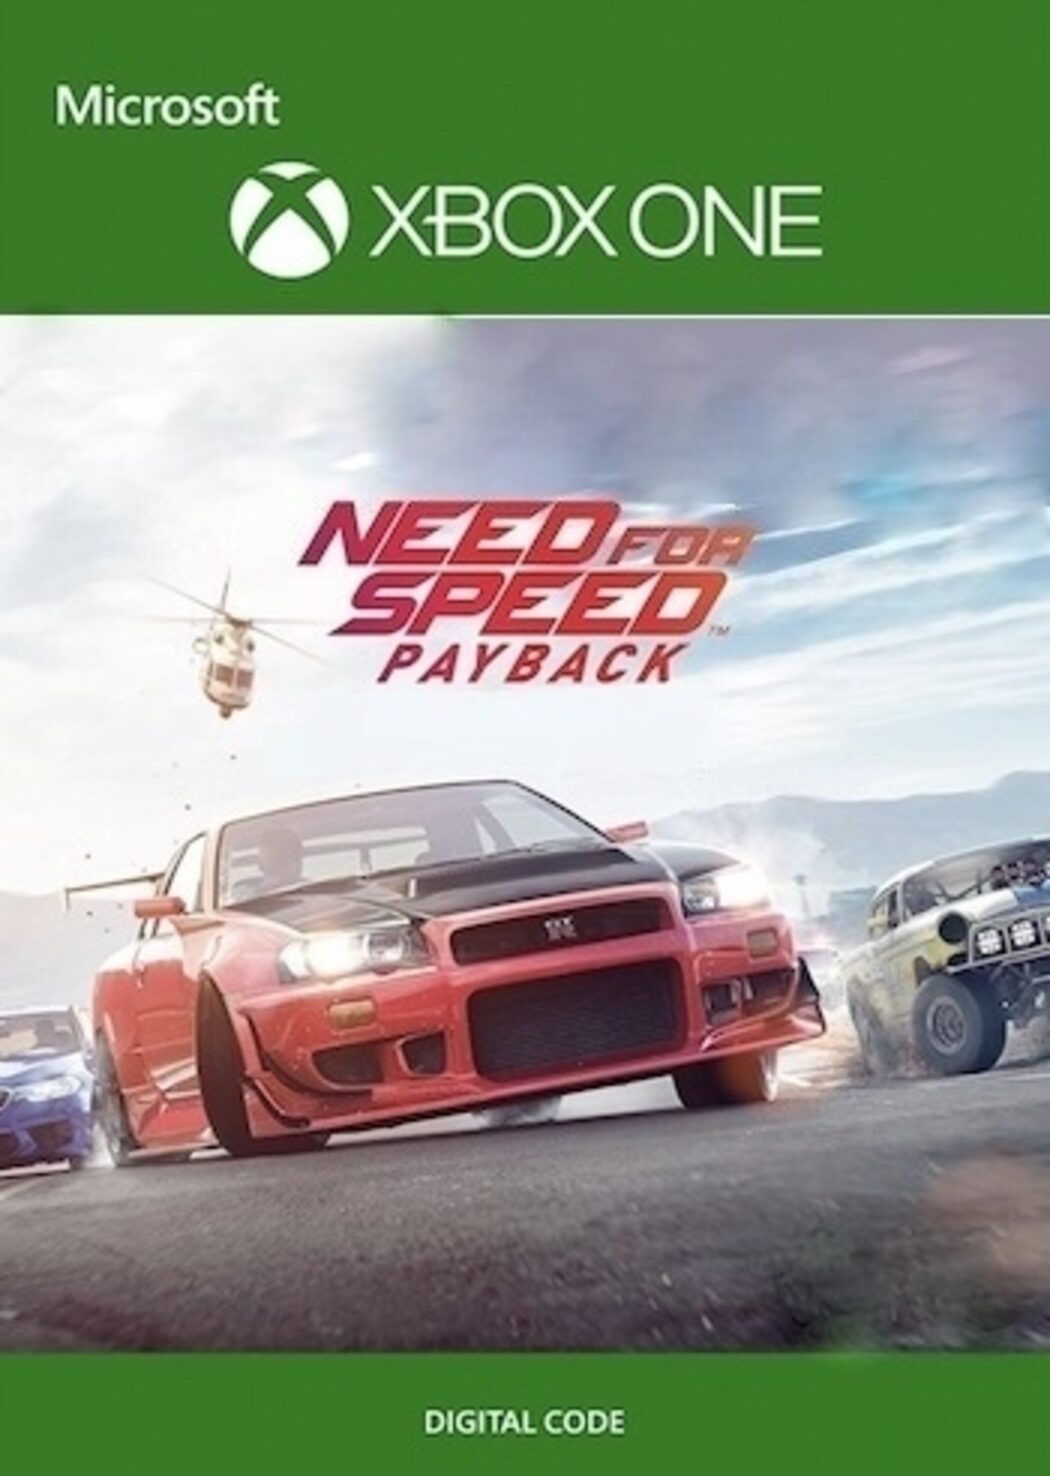 need for speed shift xbox one